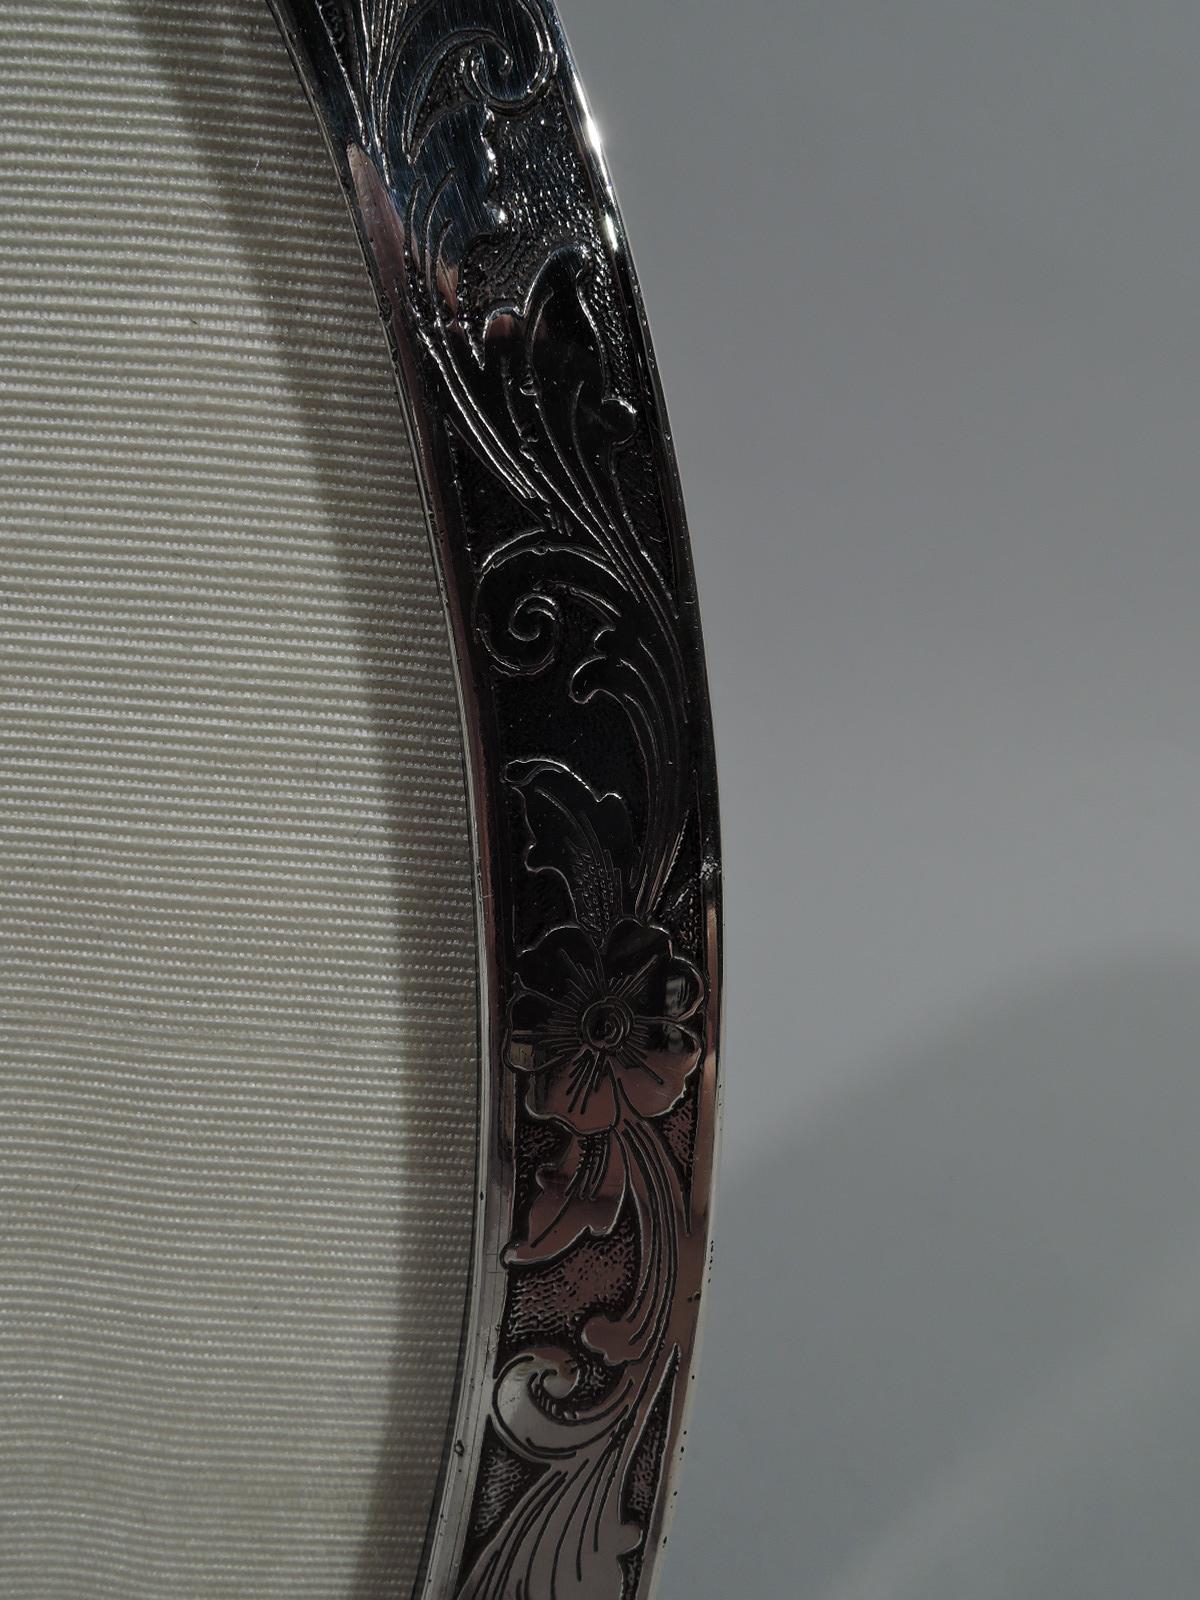 Art Nouveau sterling silver picture frame. Made by Unger Bros in Newark, circa 1910. Narrow oval window and flat surround with acid-etched floral scrollwork on stippled ground. Top and bottom have chevron-shaped cartouches (vacant). Two open bracket